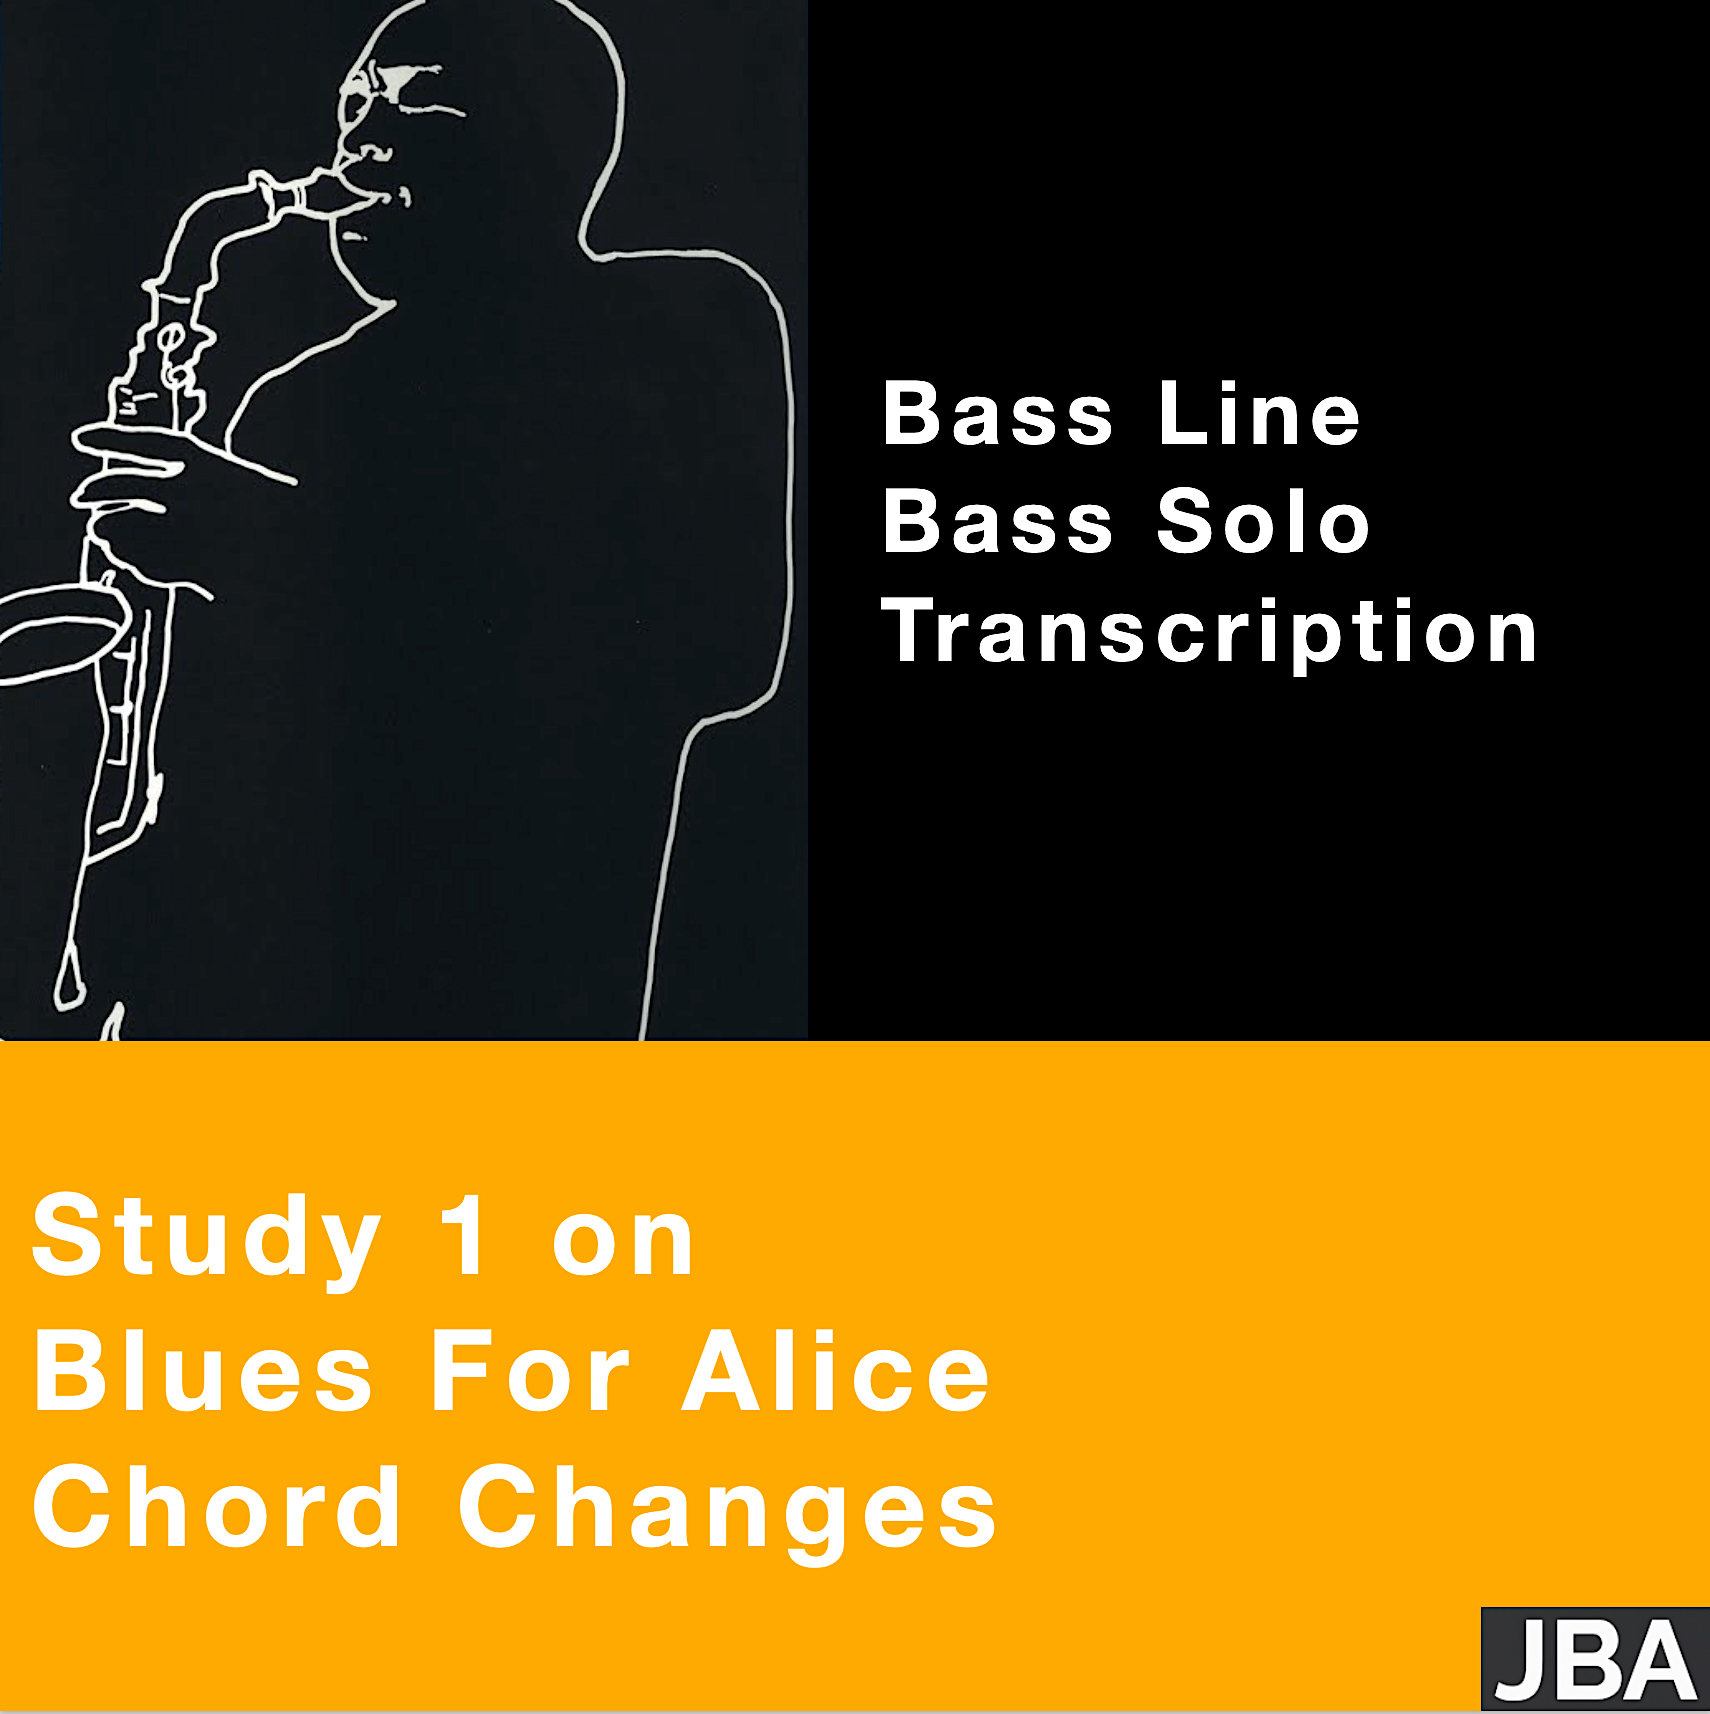 Study 1 on Blues For Alice chord changes